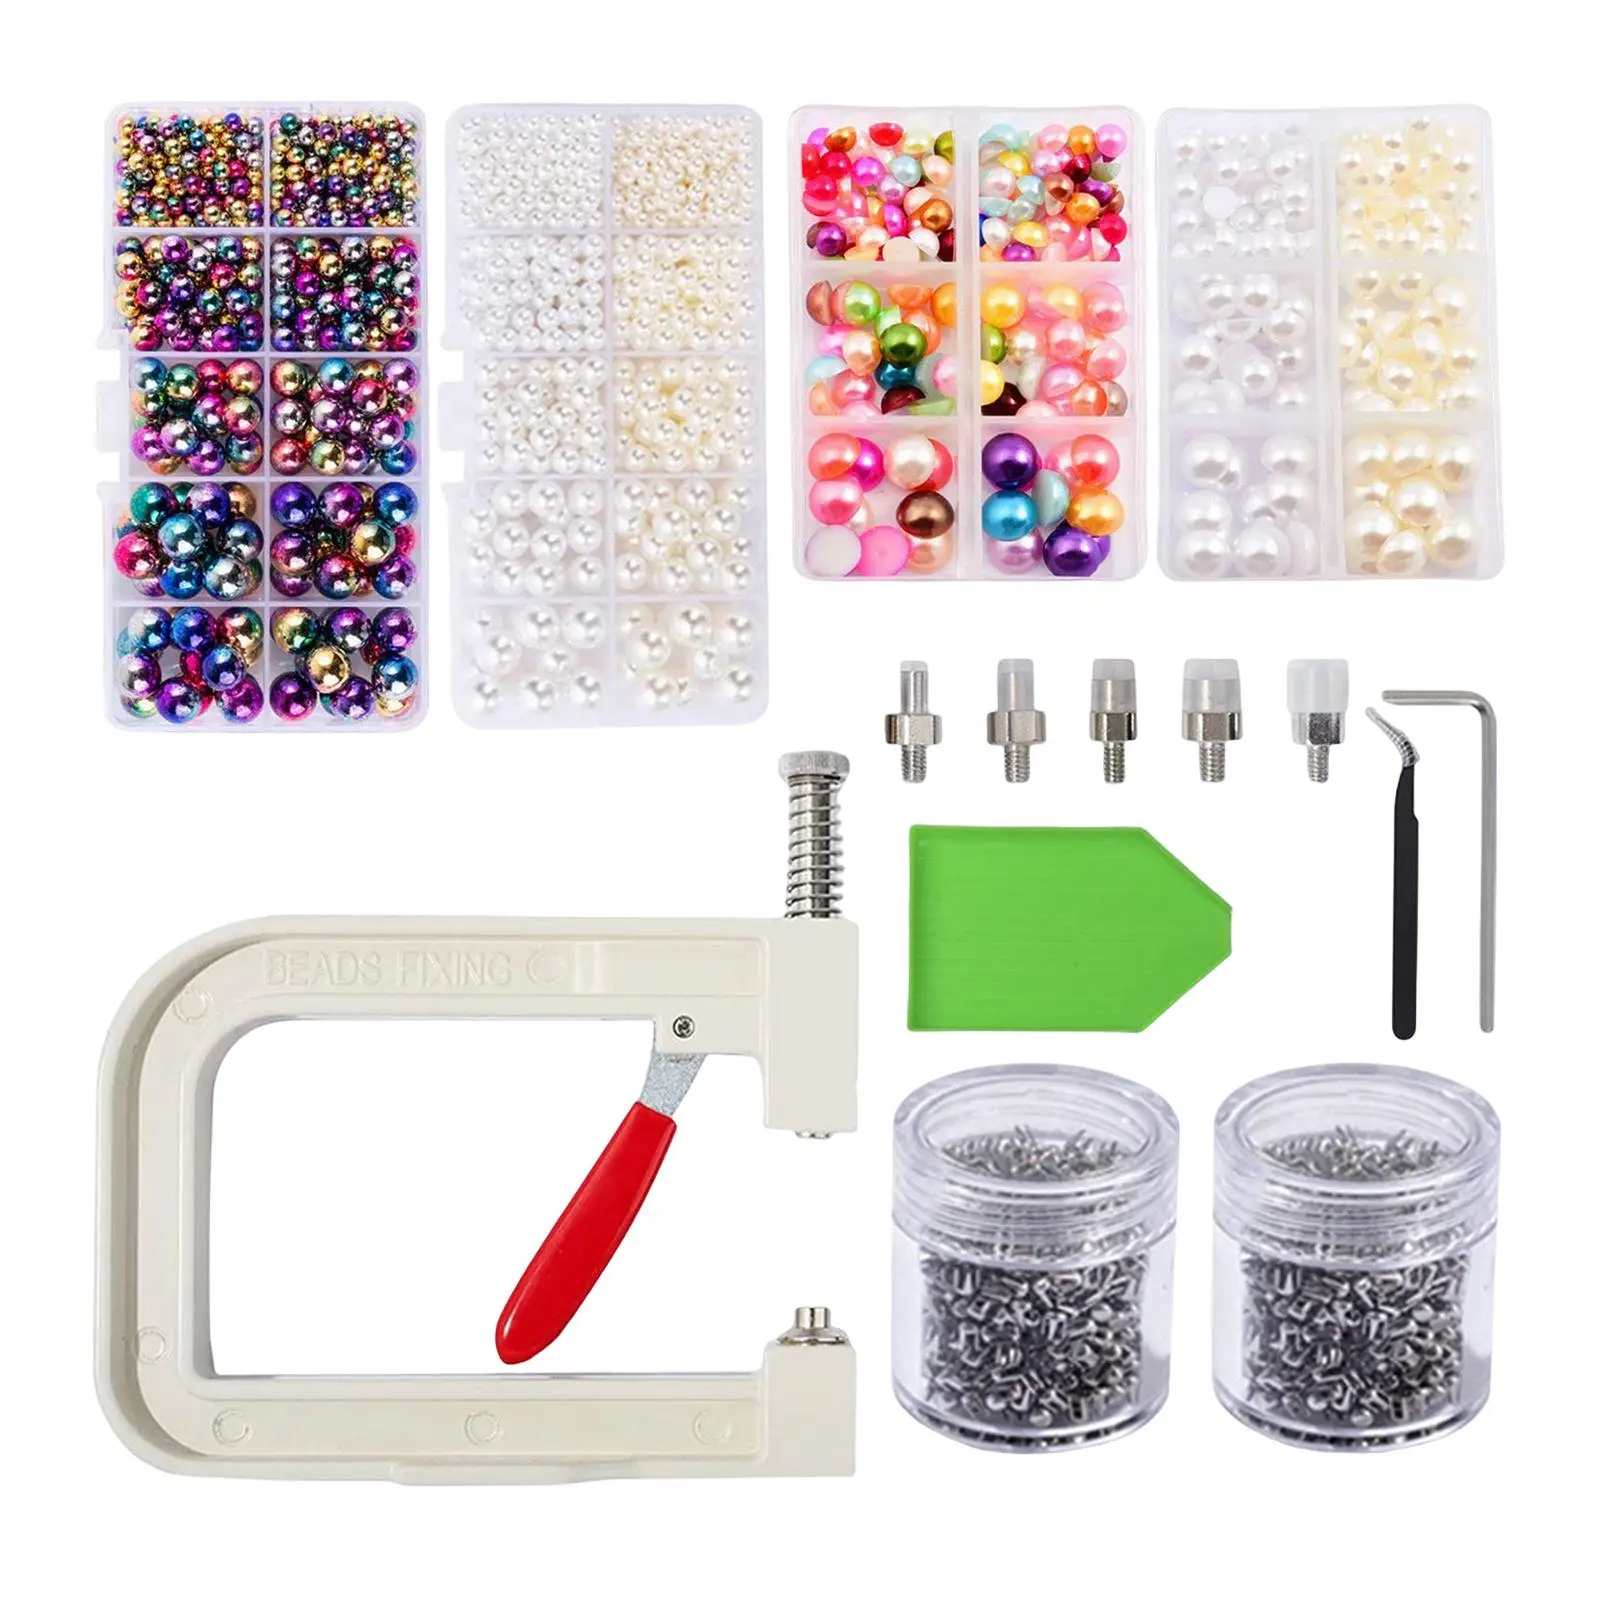 

Jewelry Pearl Setting Machine Tools Manual Beading Machine Beads Rivet Fixing Machine for Punch Clothes Decoration DIY Project